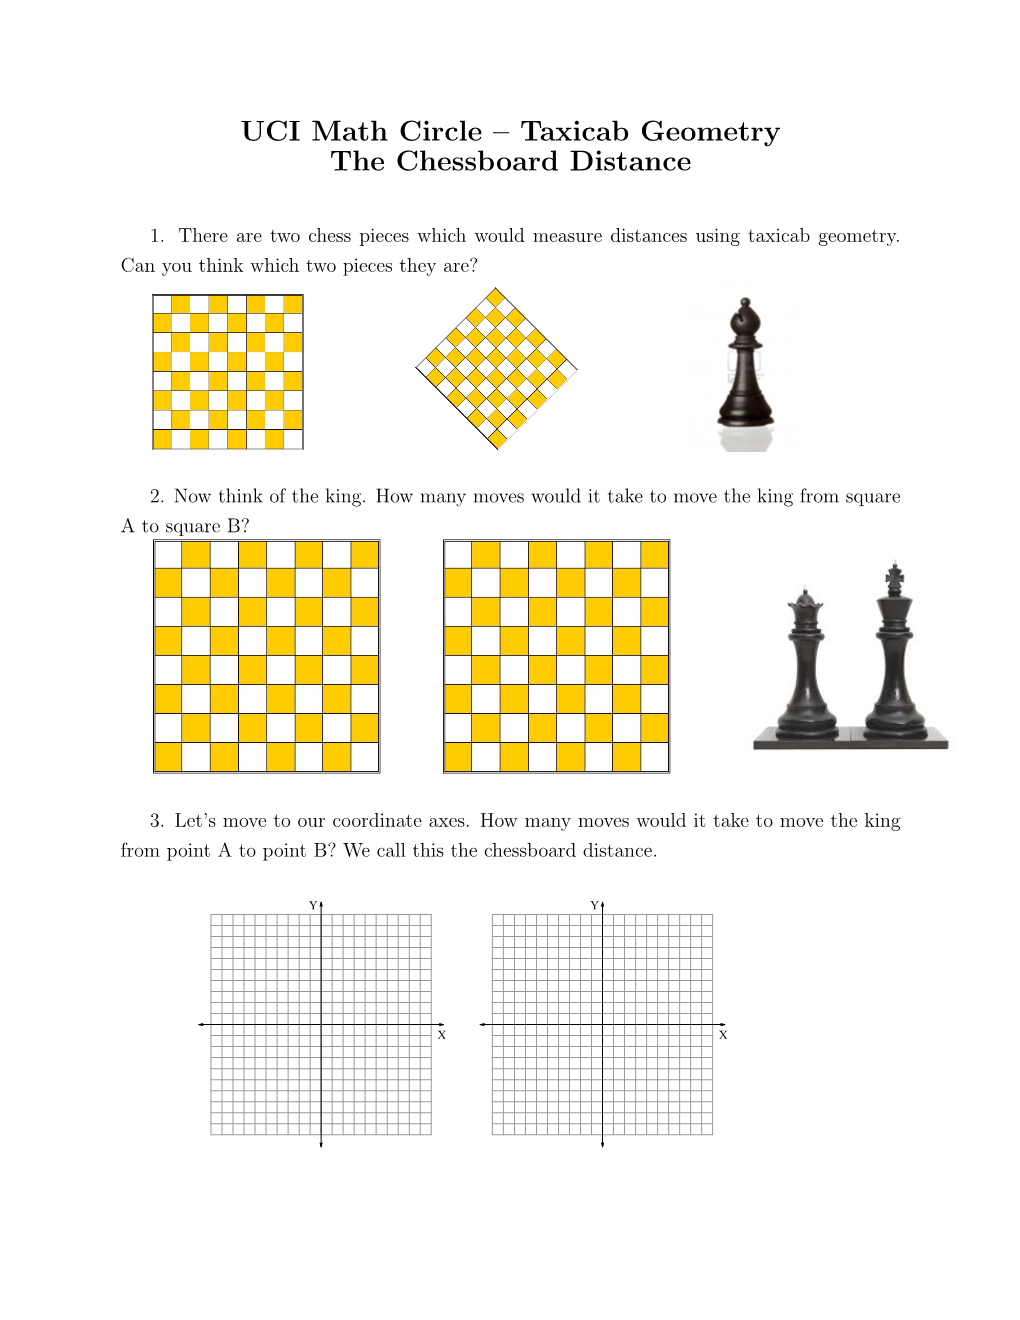 UCI Math Circle – Taxicab Geometry the Chessboard Distance